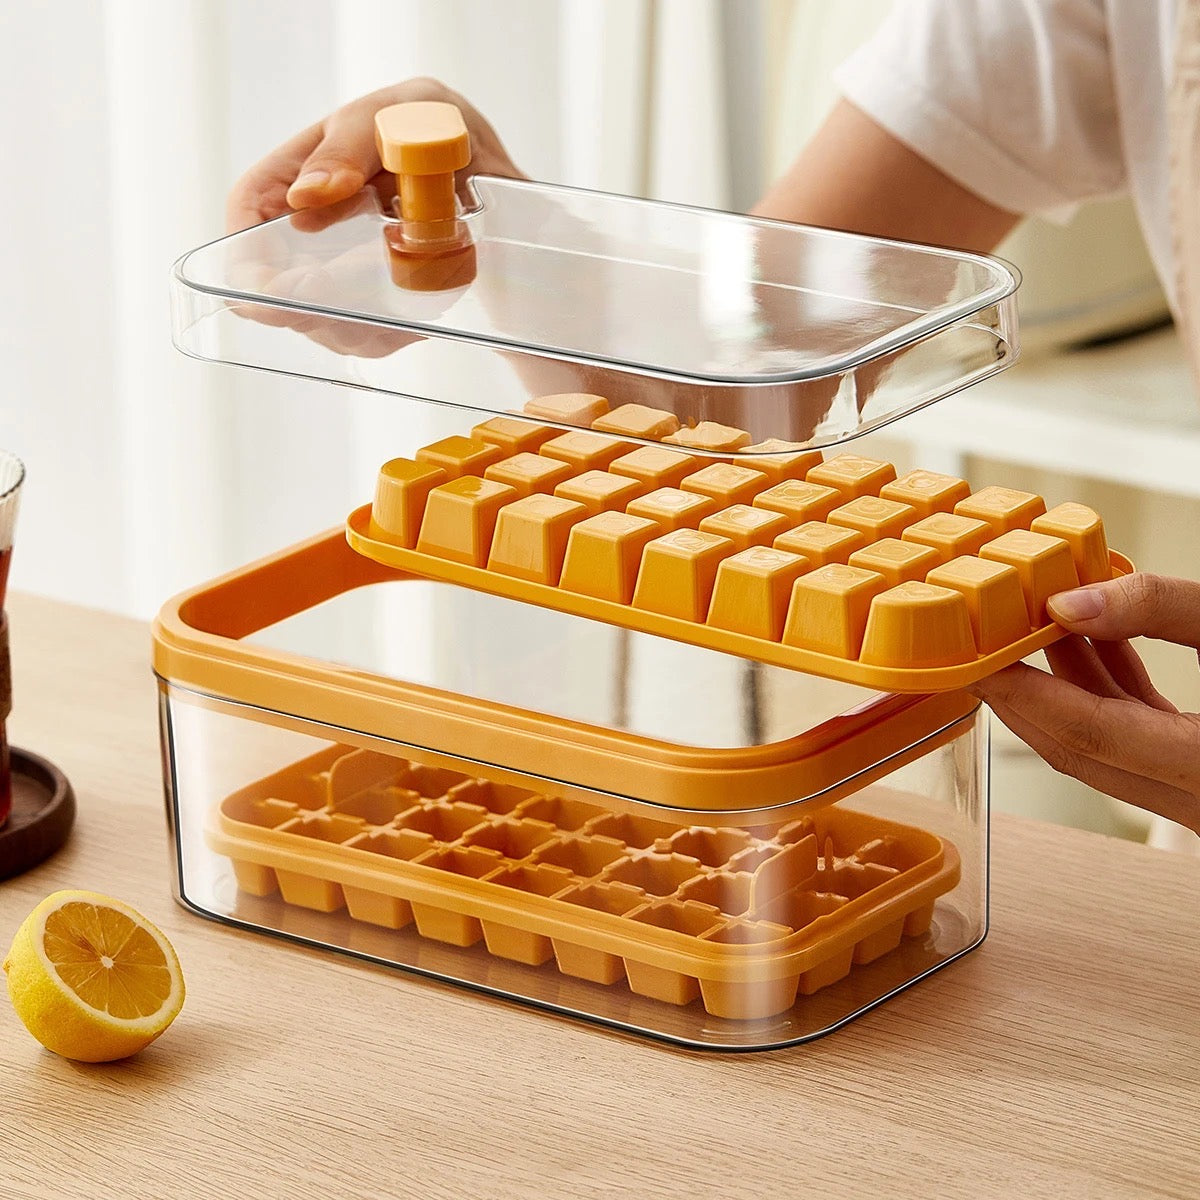 One-Press Transparent Ice Making Mold, Durable Ice Cube Mold Tray with Bin